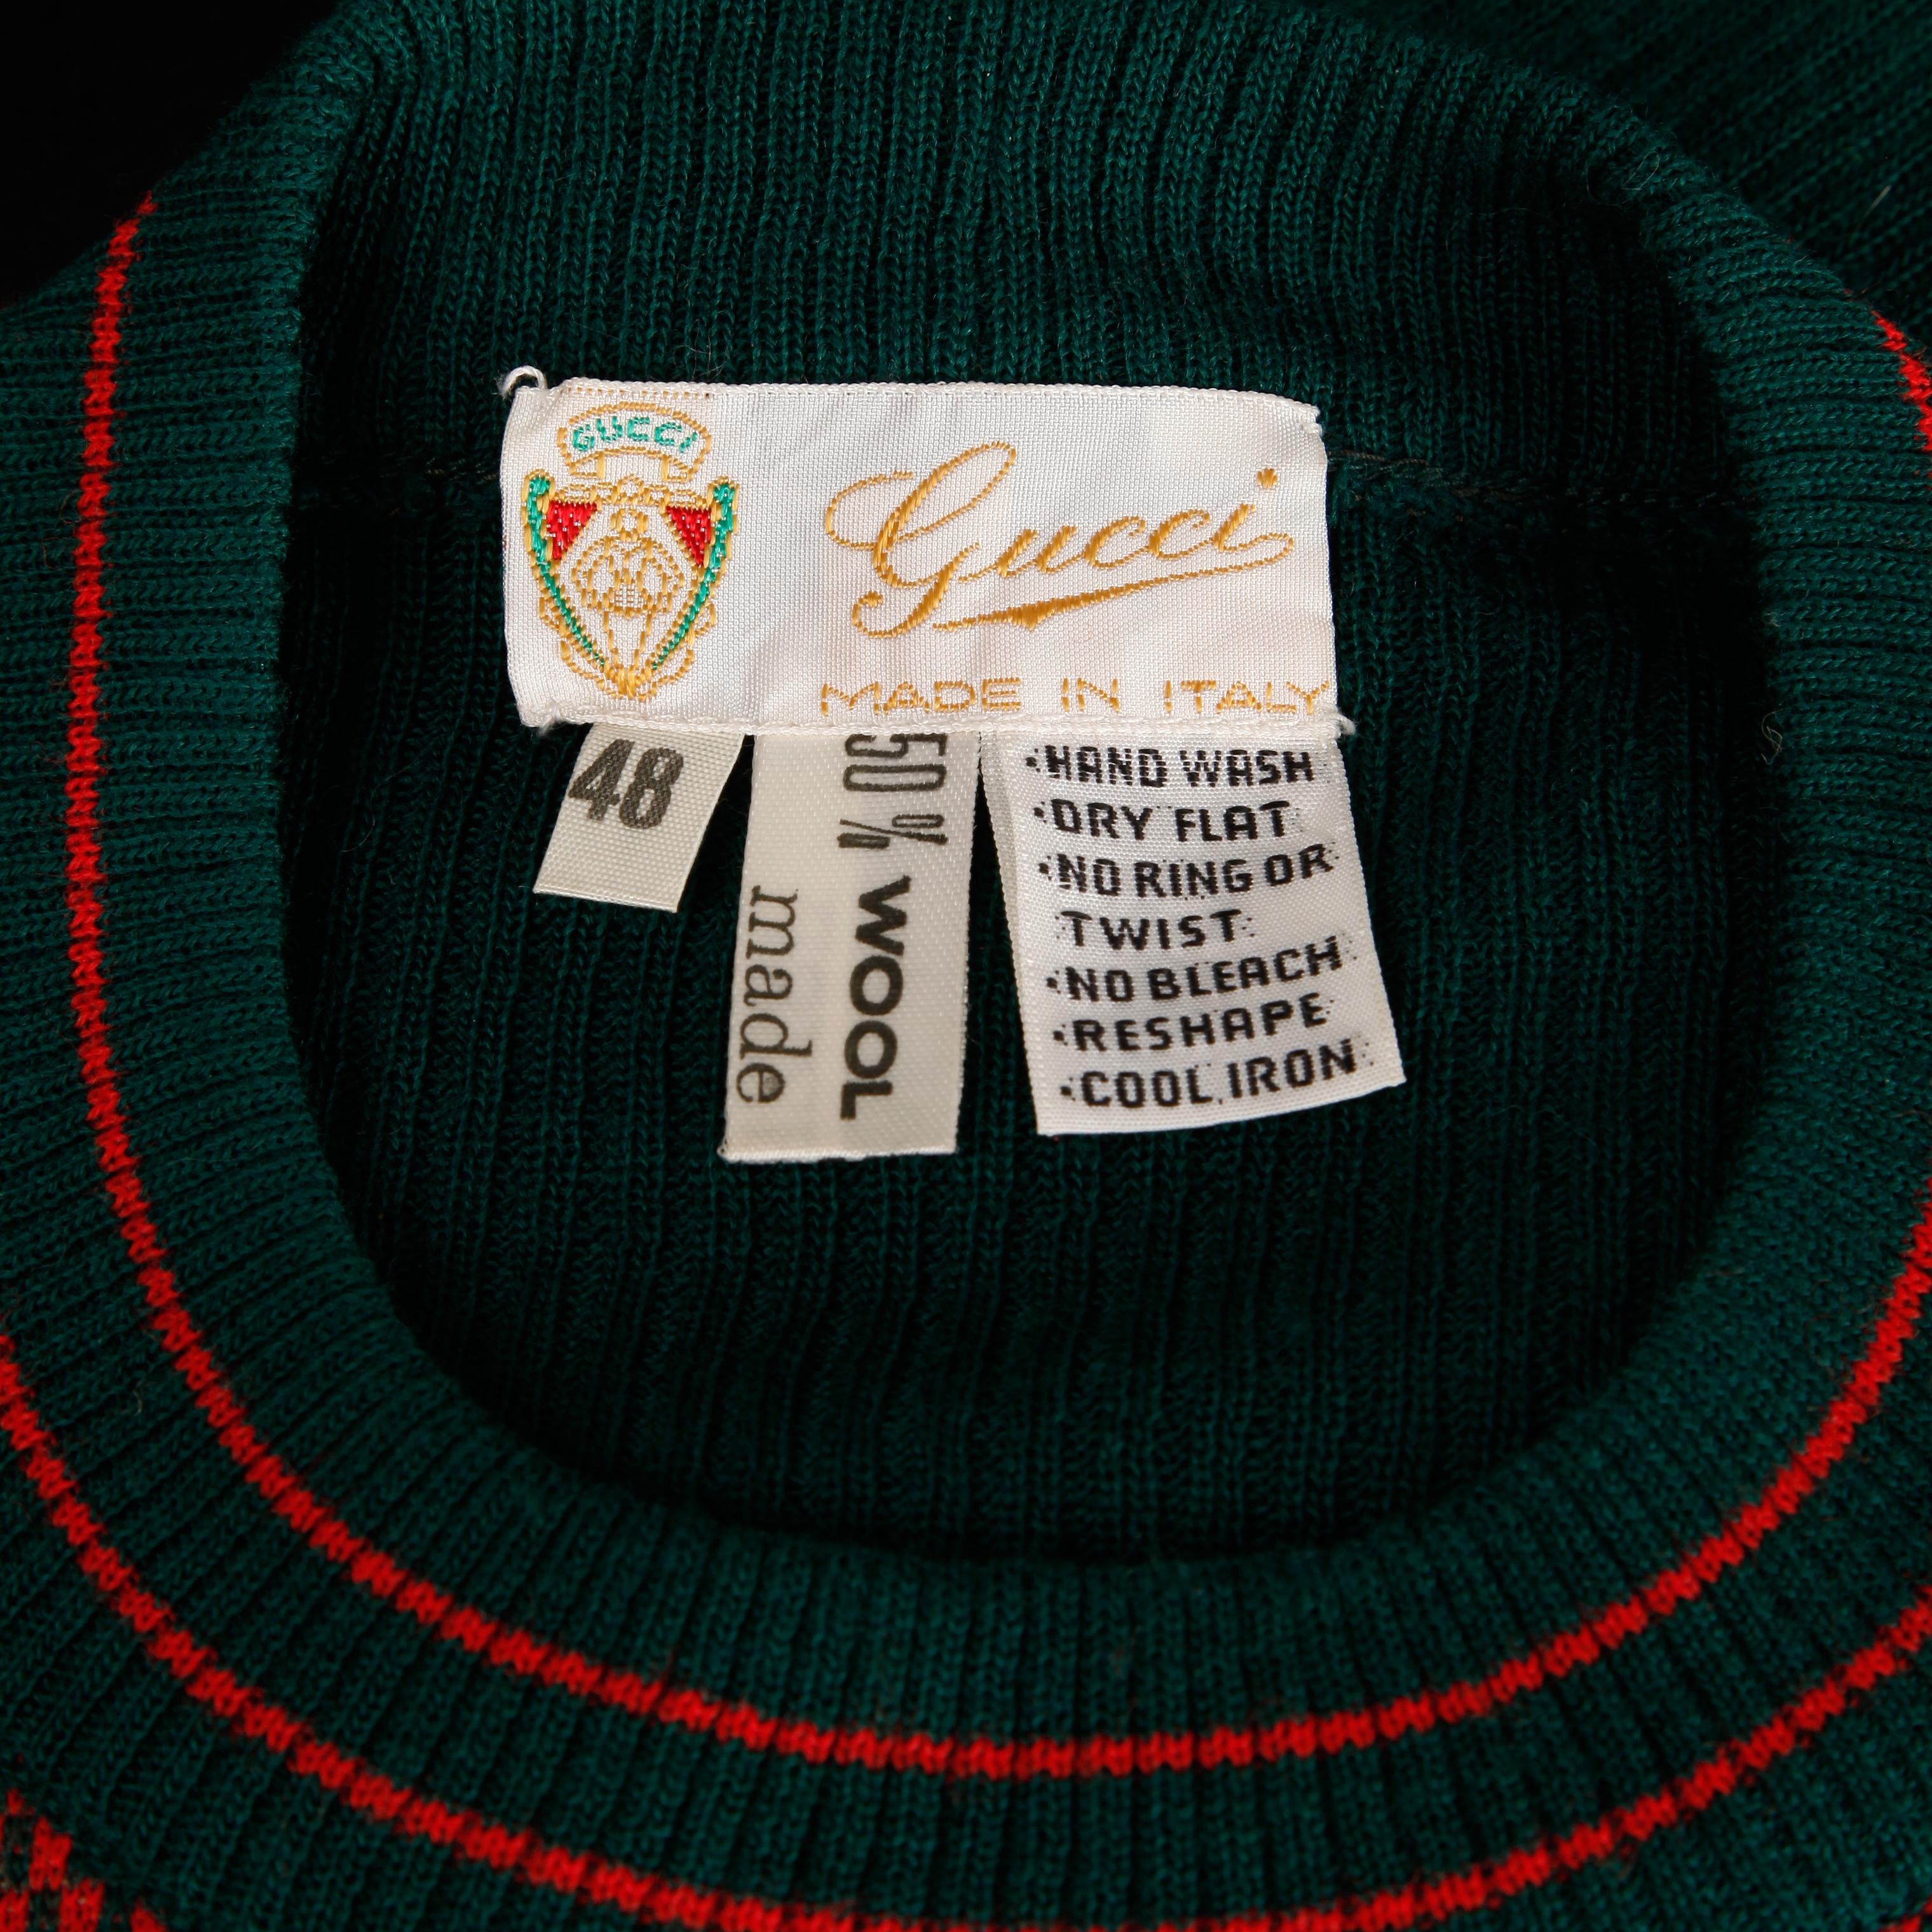 Rare 1970s vintage Gucci golf sweater in green and red from the estate of Pamela Lewis (Jerry Lewis/ Gary Lewis). Novelty design featuring checkers and golfers. Unlined with no closure (pulls on over the head). Fabric content is 50% wool 50%